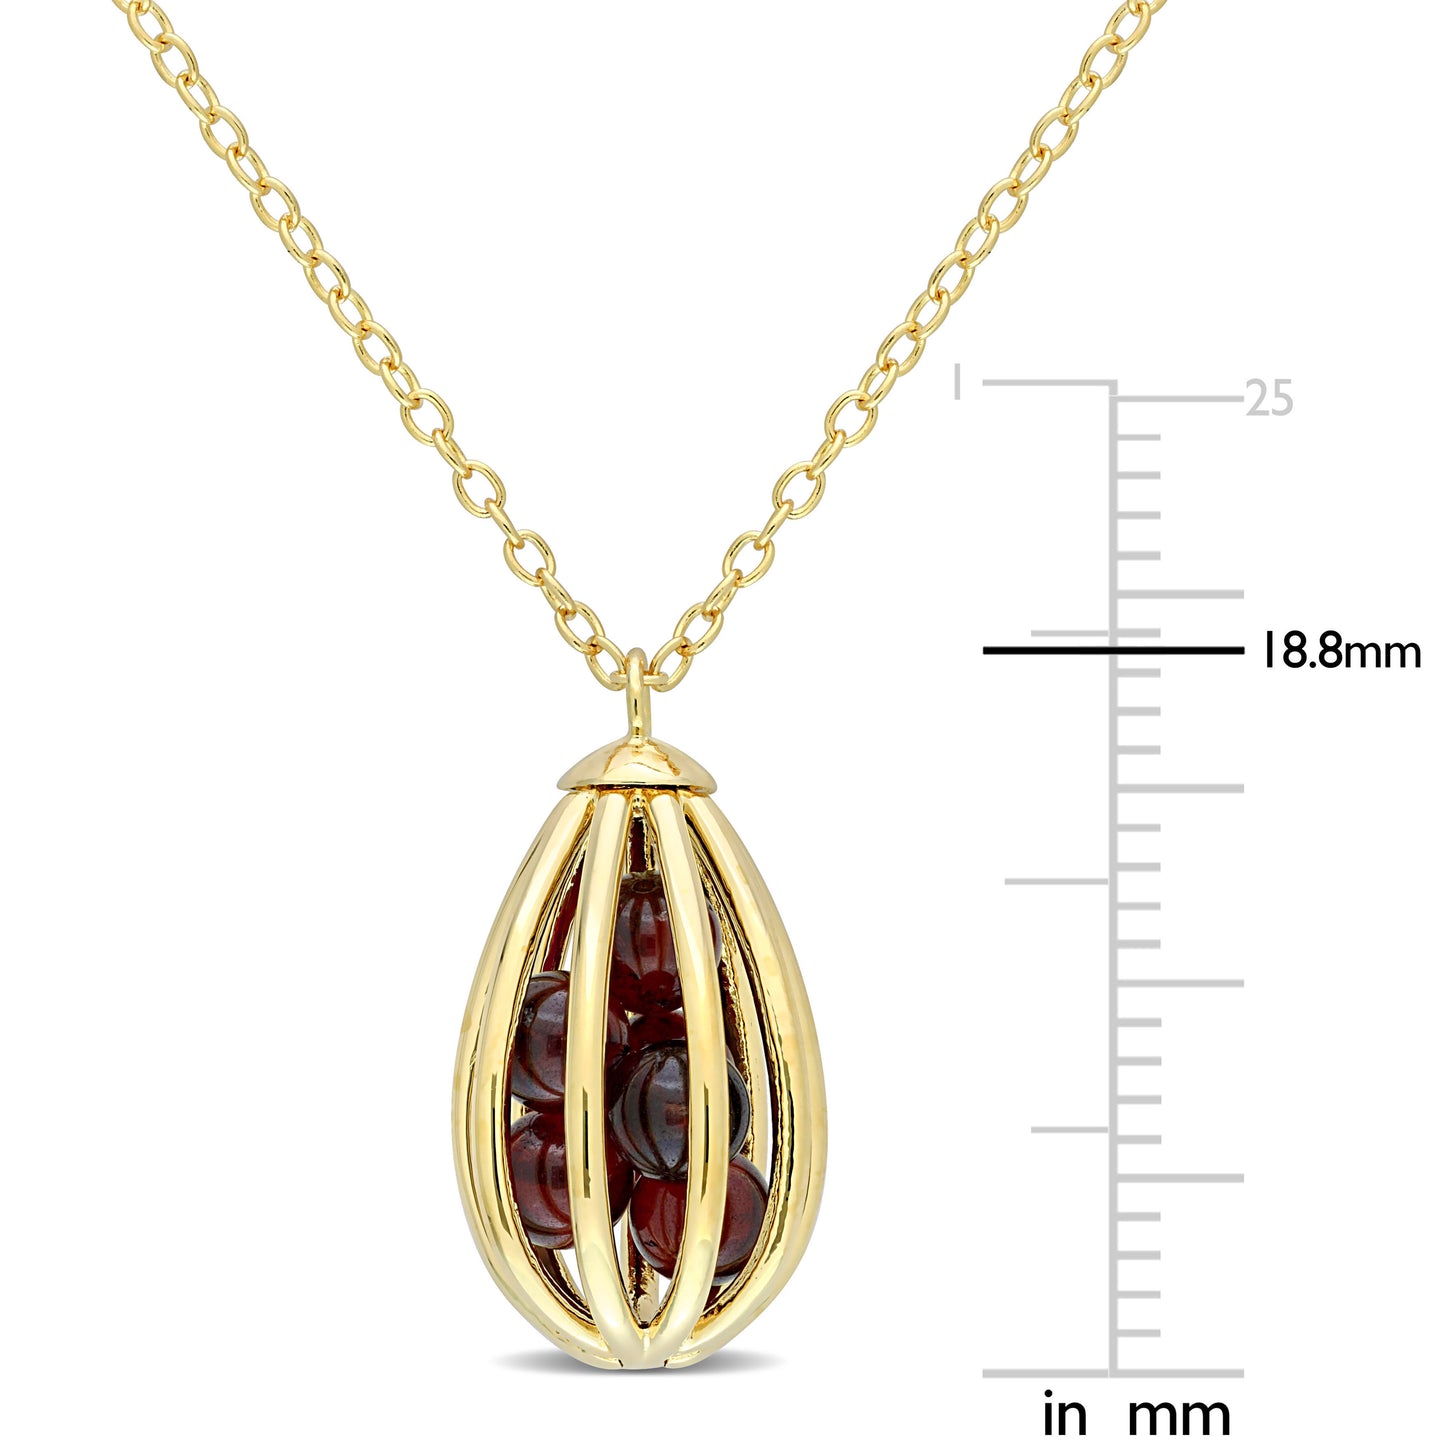 3 5/8ct Garnet Cage Necklace in Yellow Silver